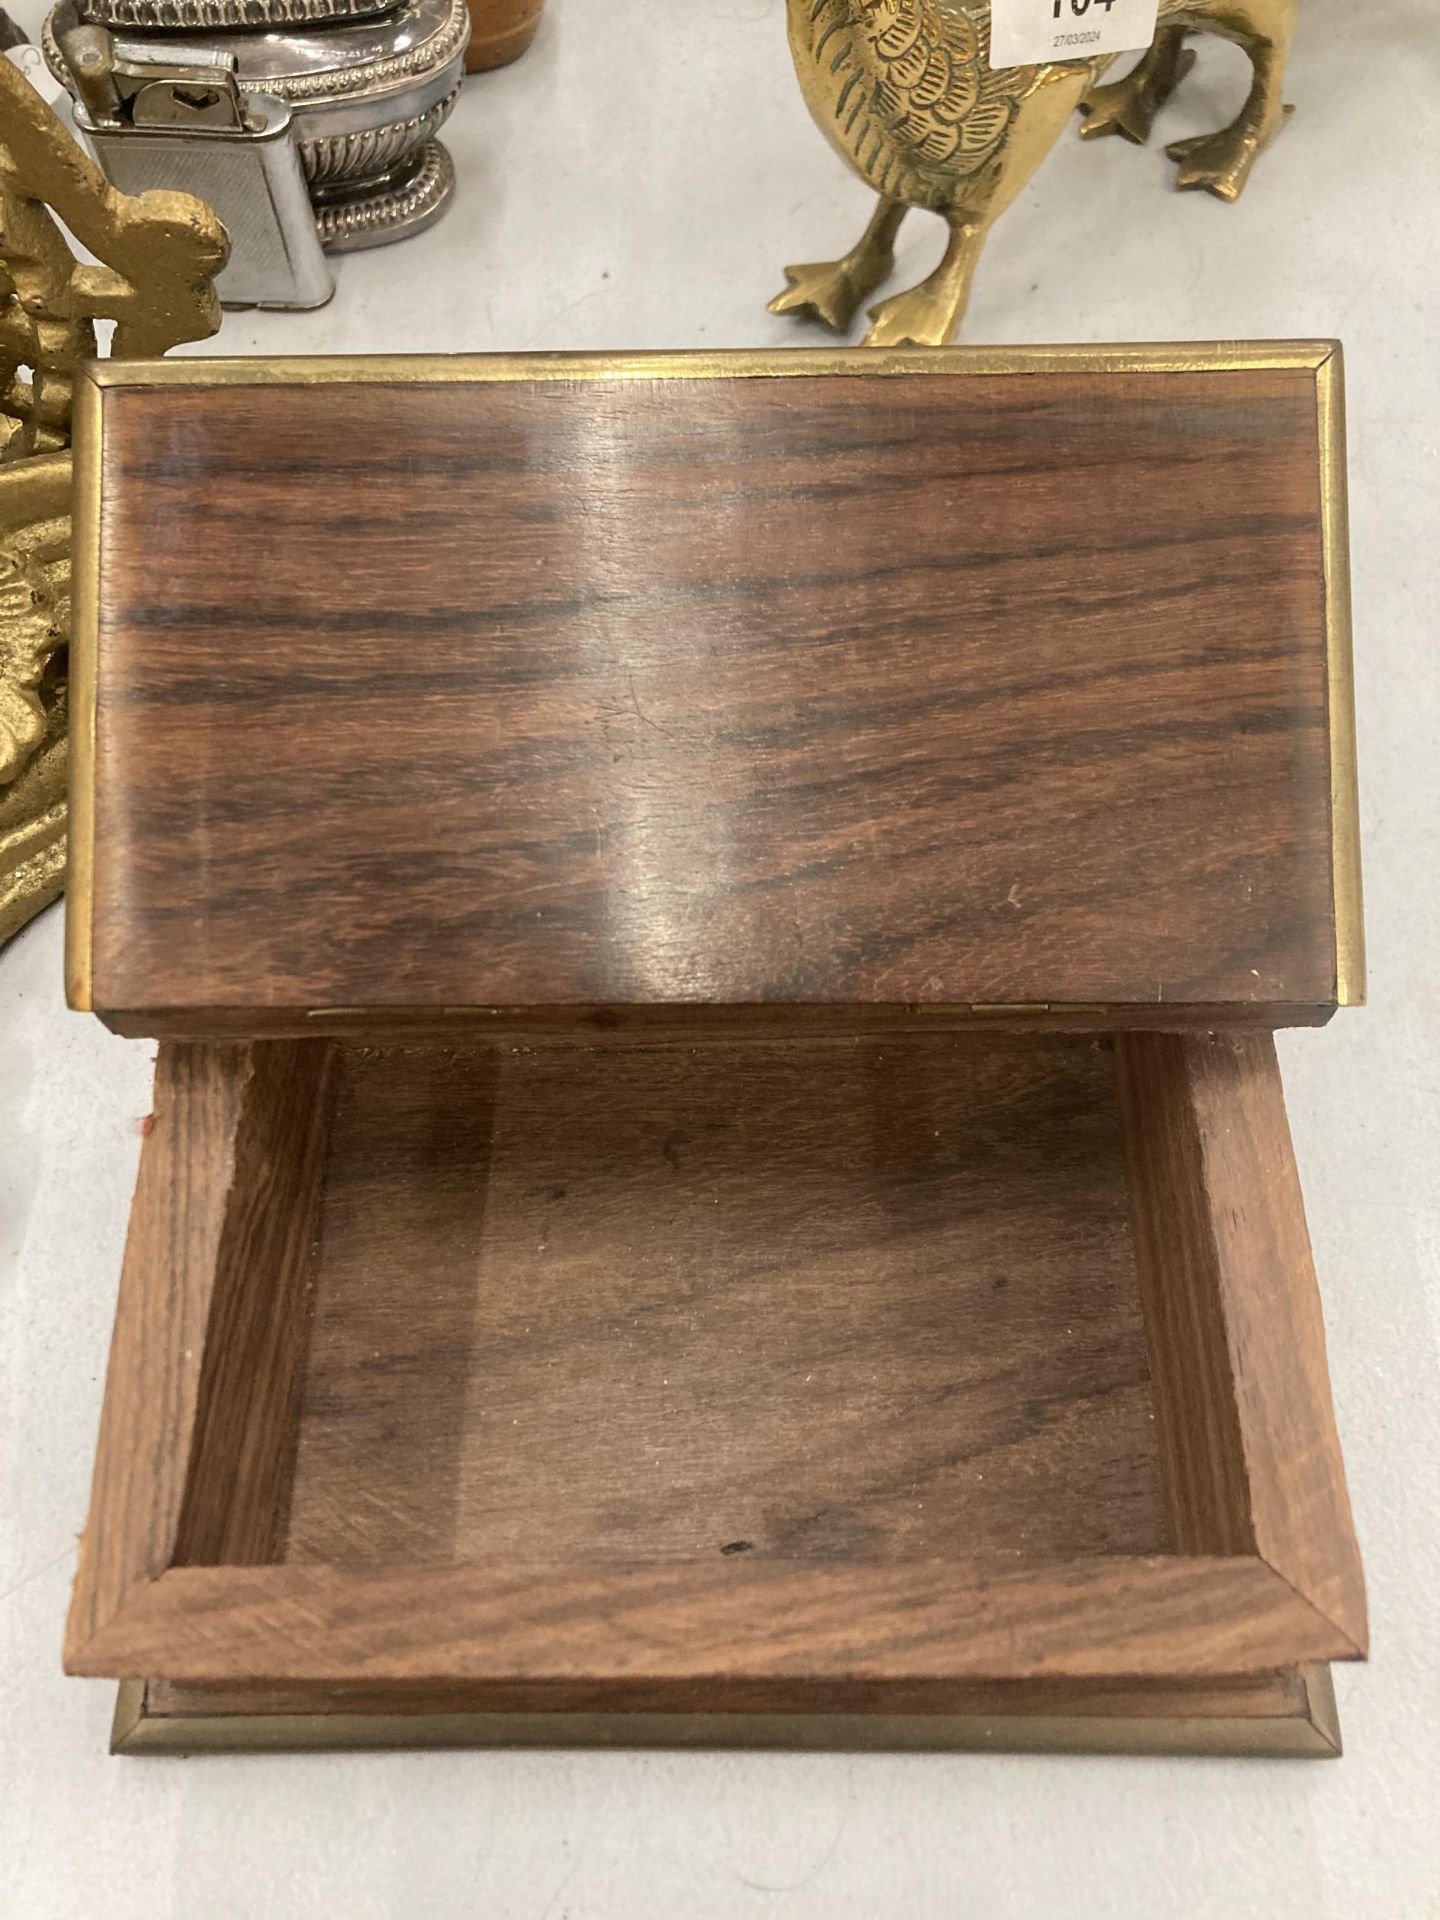 A MAHOGANY BOX IN THE SHAPE OF A BOOK WITH BRASS EDGES AND AN ANCHOR MOTIF TO THE LID - Image 2 of 3